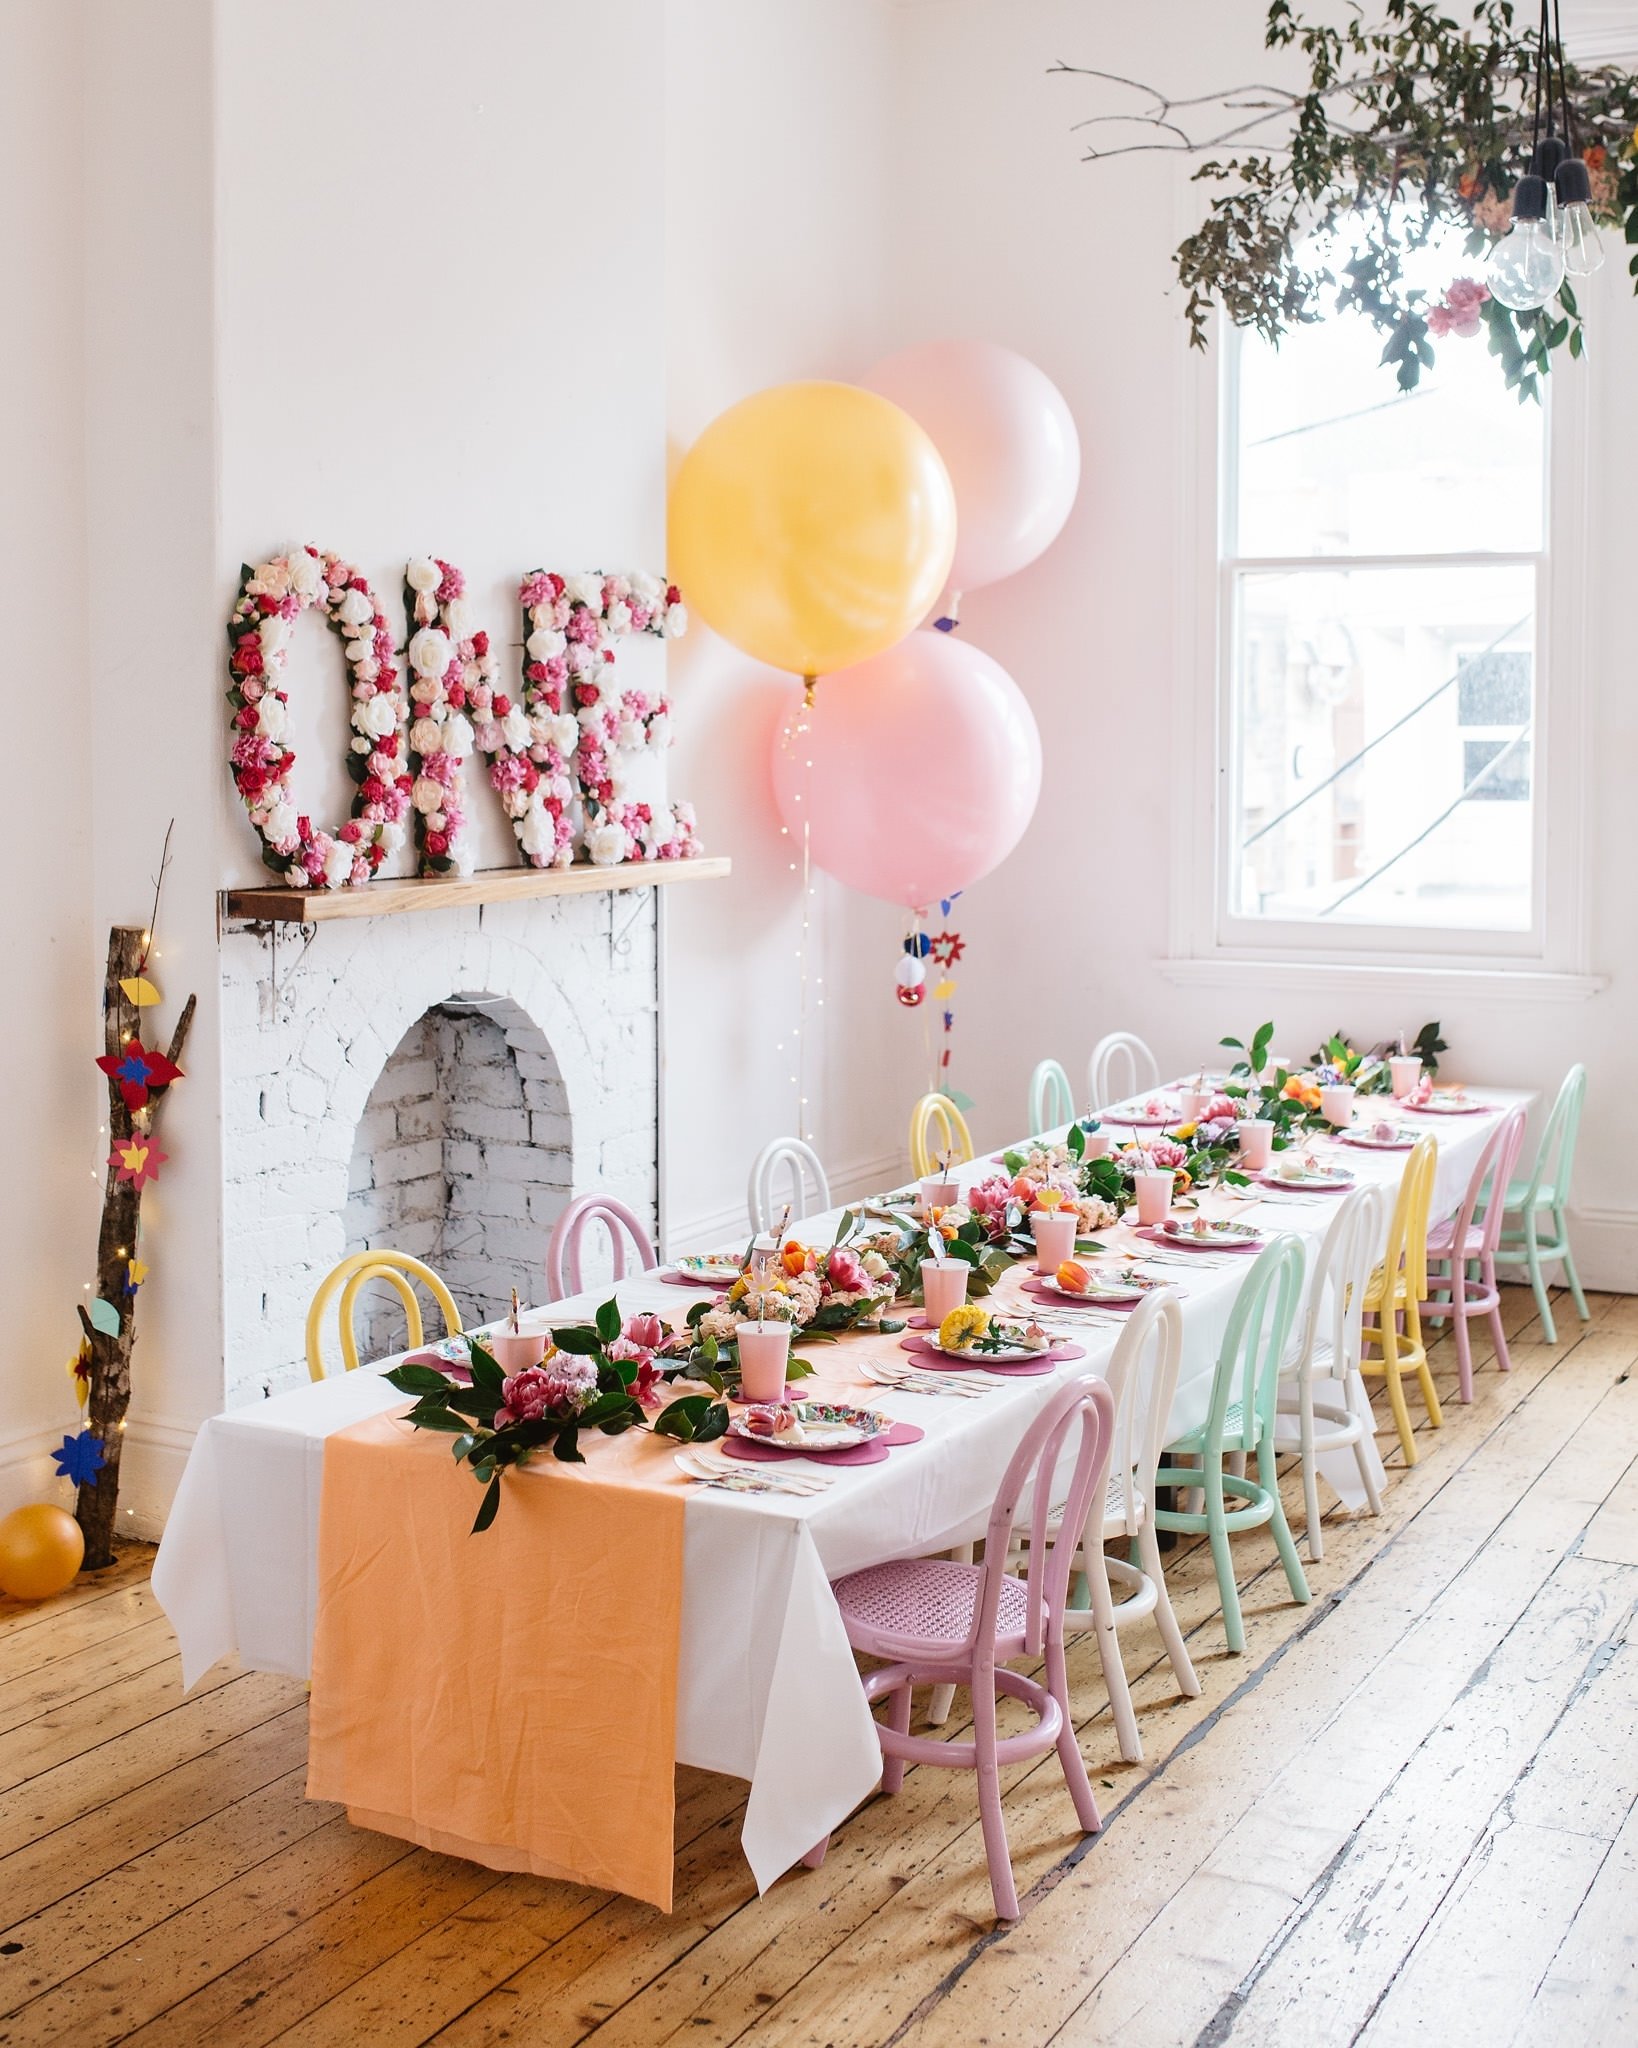 10 Unique Birthday Party Ideas For One Year Old 2020